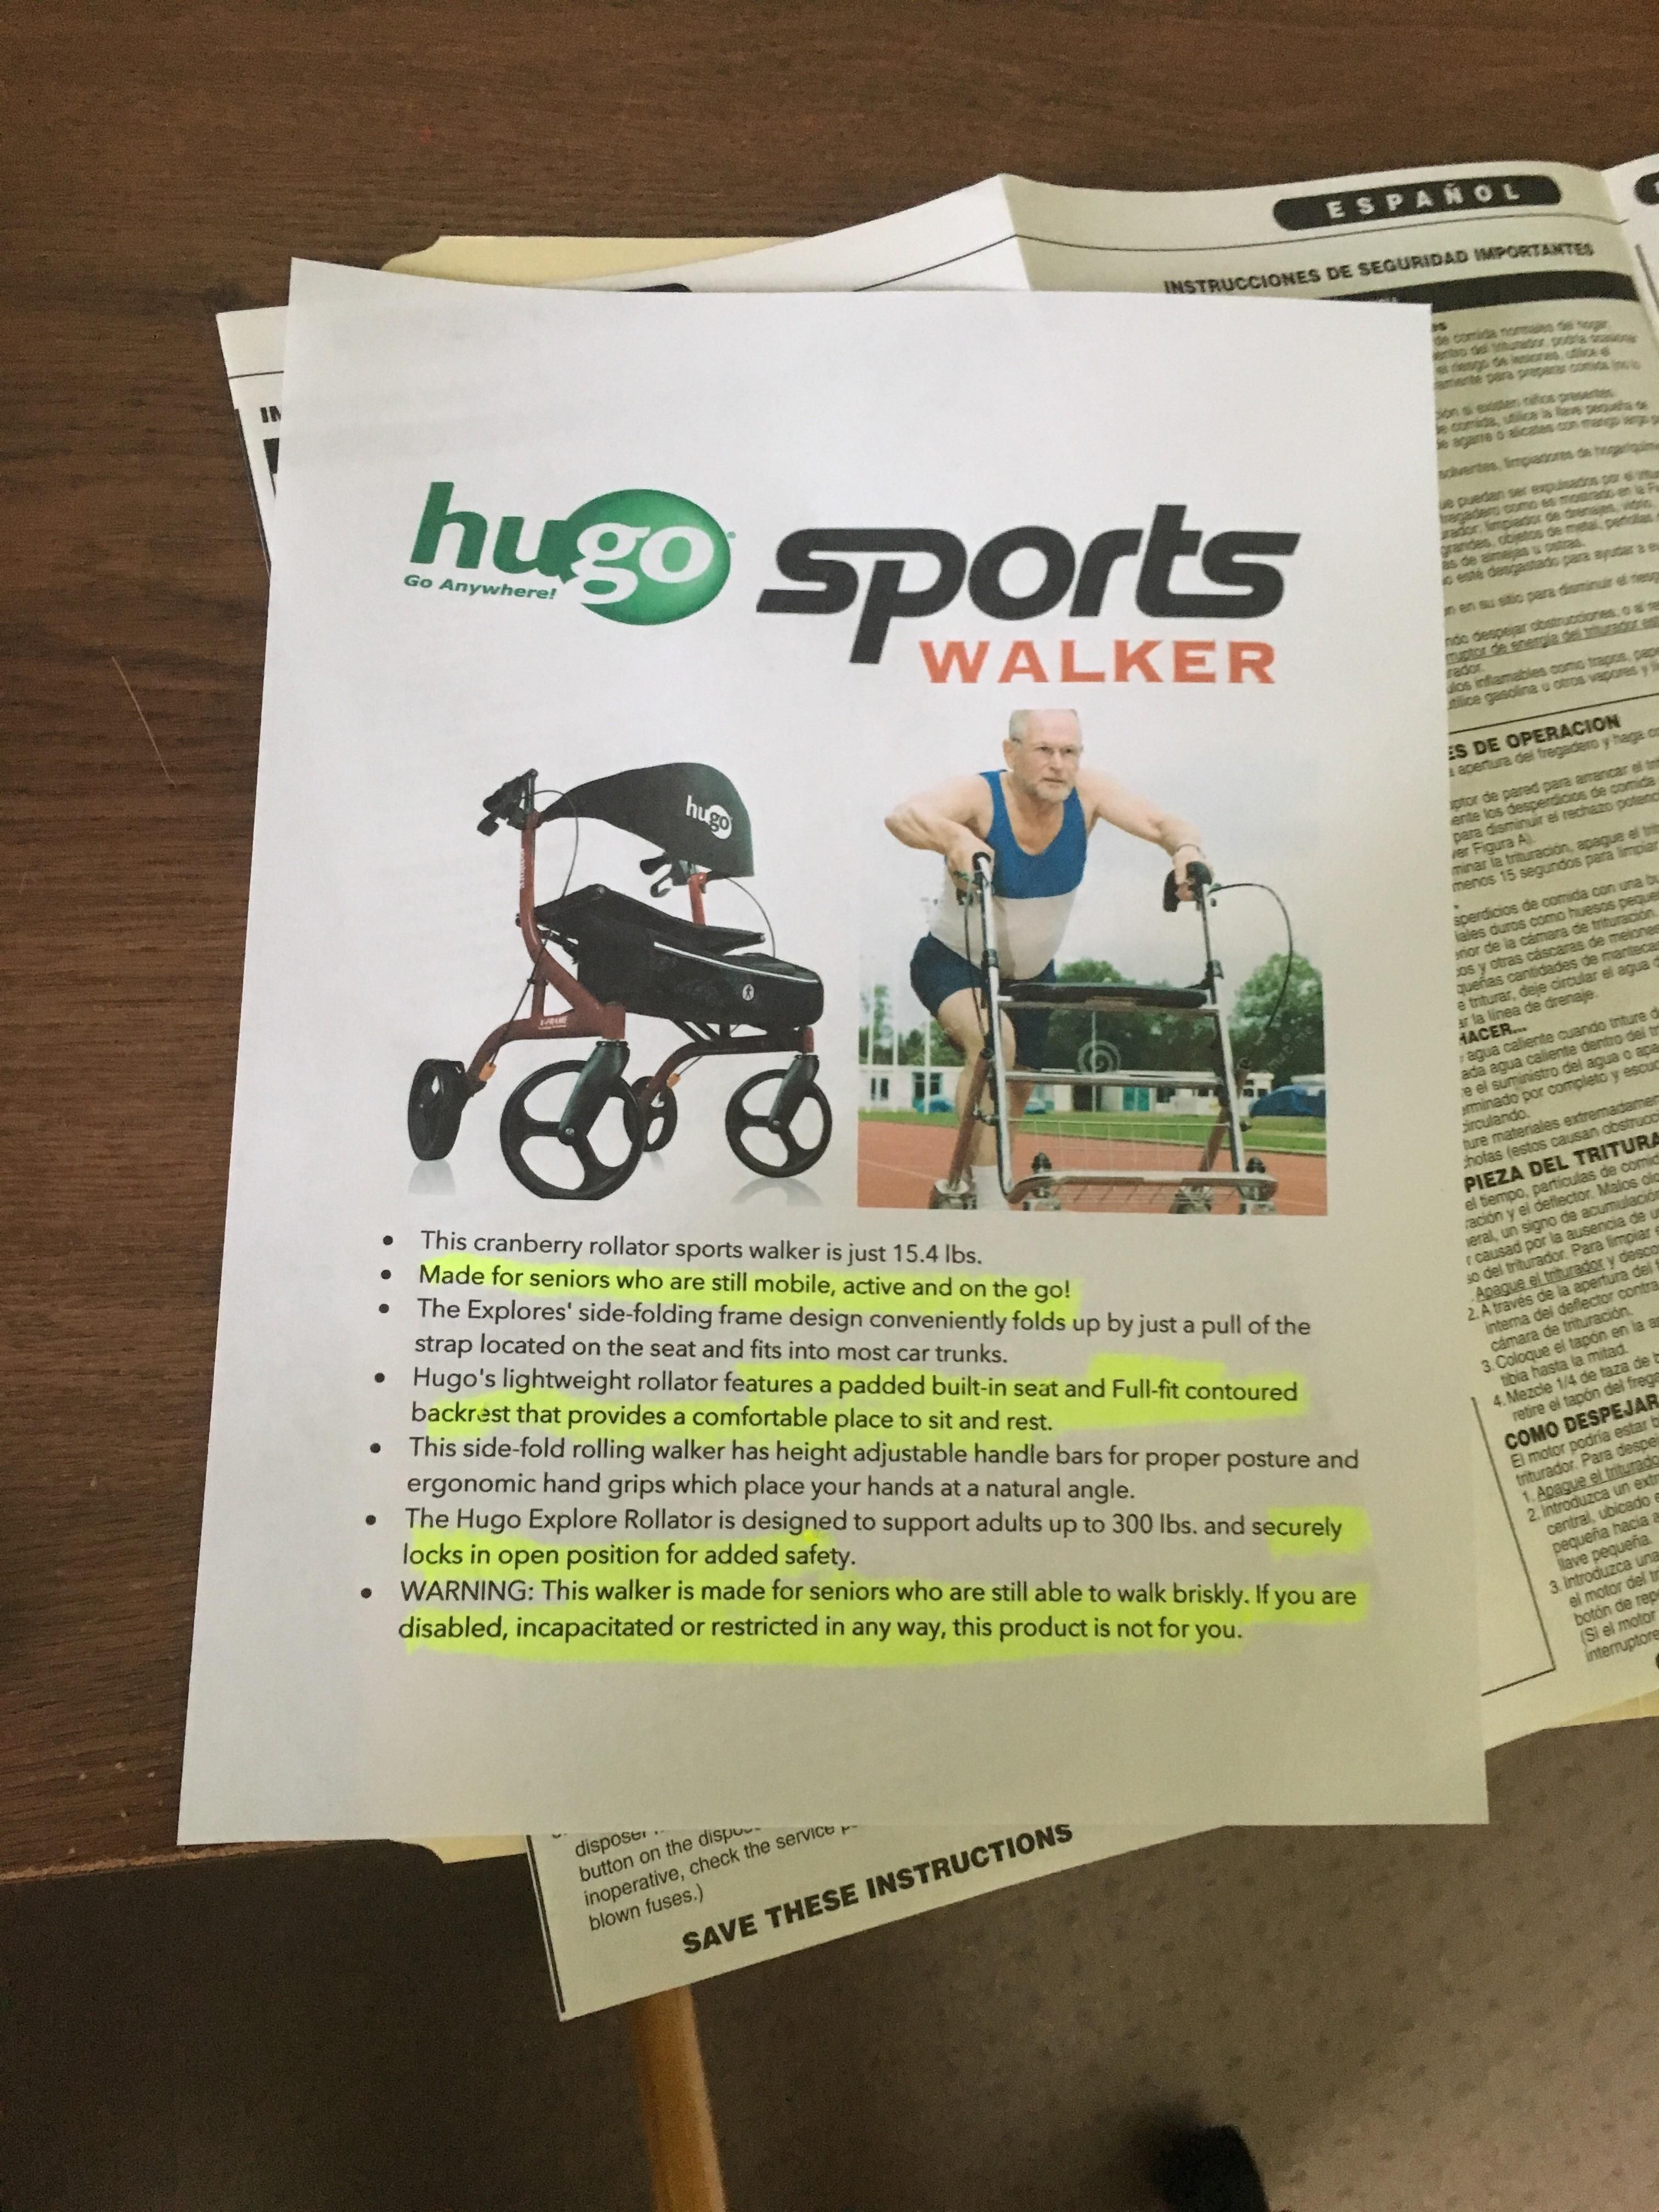 My very elderly father needs a walker but was afraid it would make him look "disabled," so I made a fake ad for a "sports" walker to make him happy